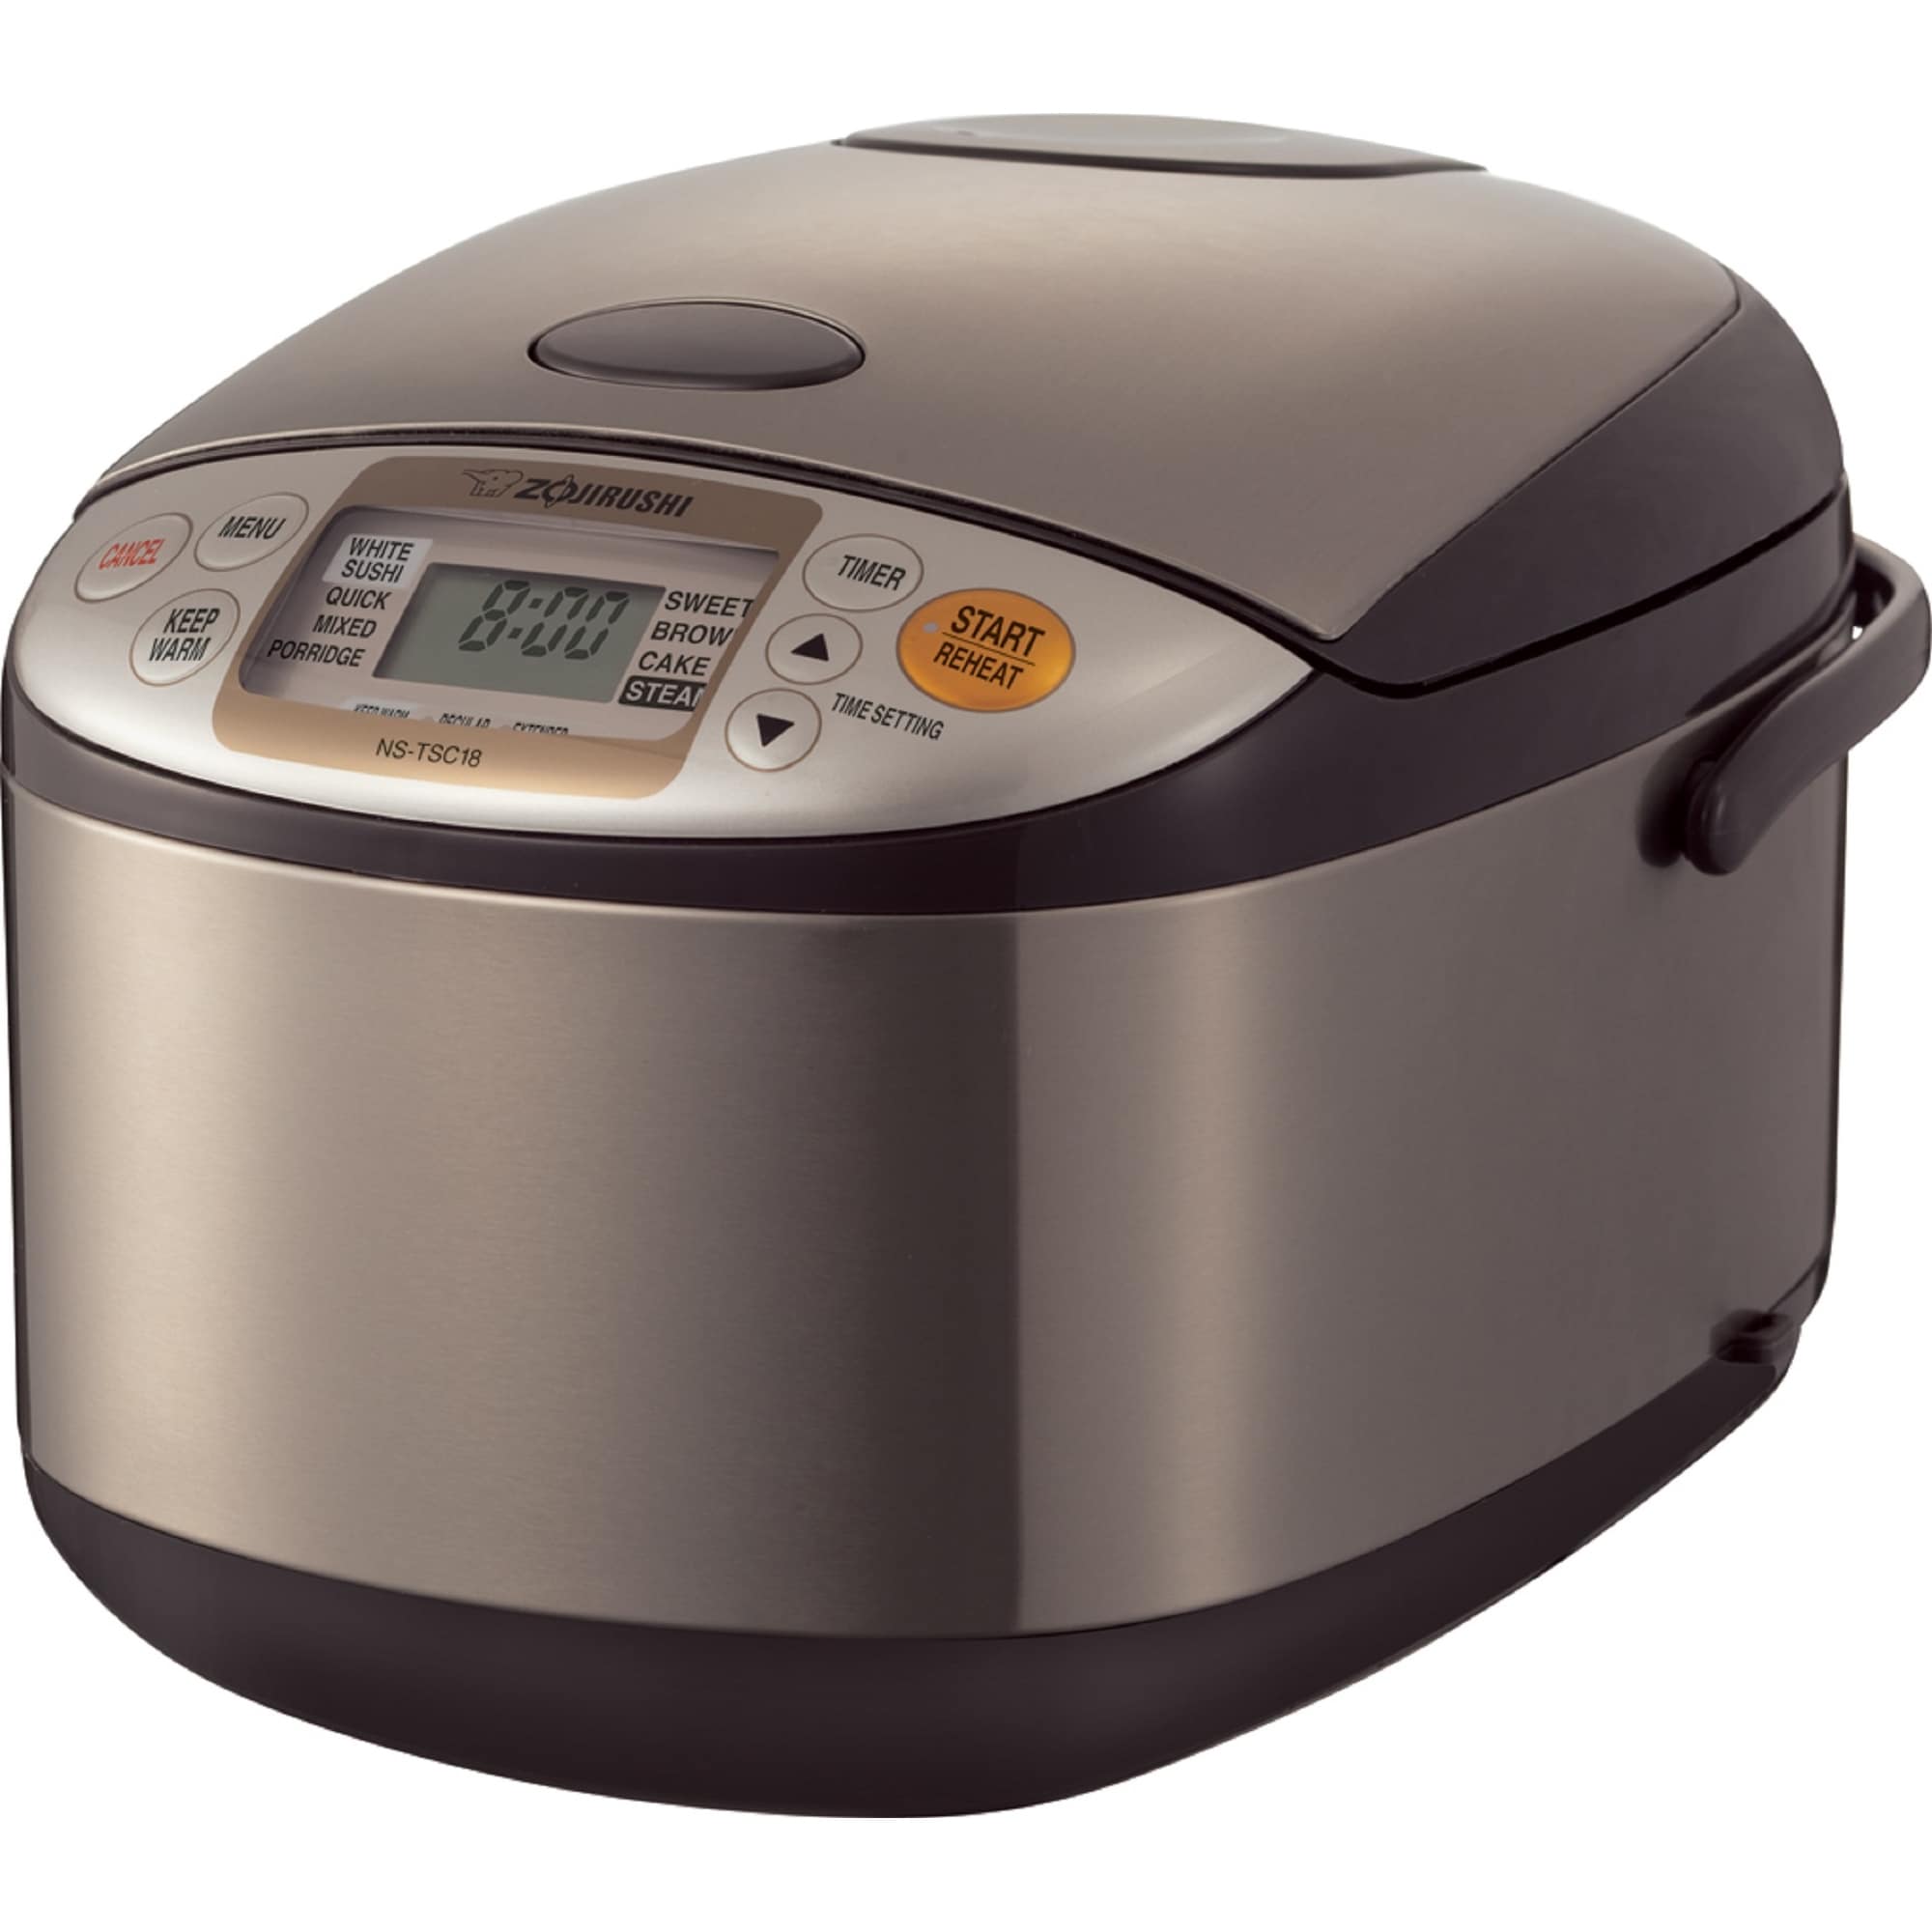 https://ak1.ostkcdn.com/images/products/is/images/direct/cfc562c3ed960523a3117ba50e094f44f4685560/Zojirushi-Micom-Rice-Cooker-and-Warmer-%2810-Cup--Stainless-Brown%29.jpg